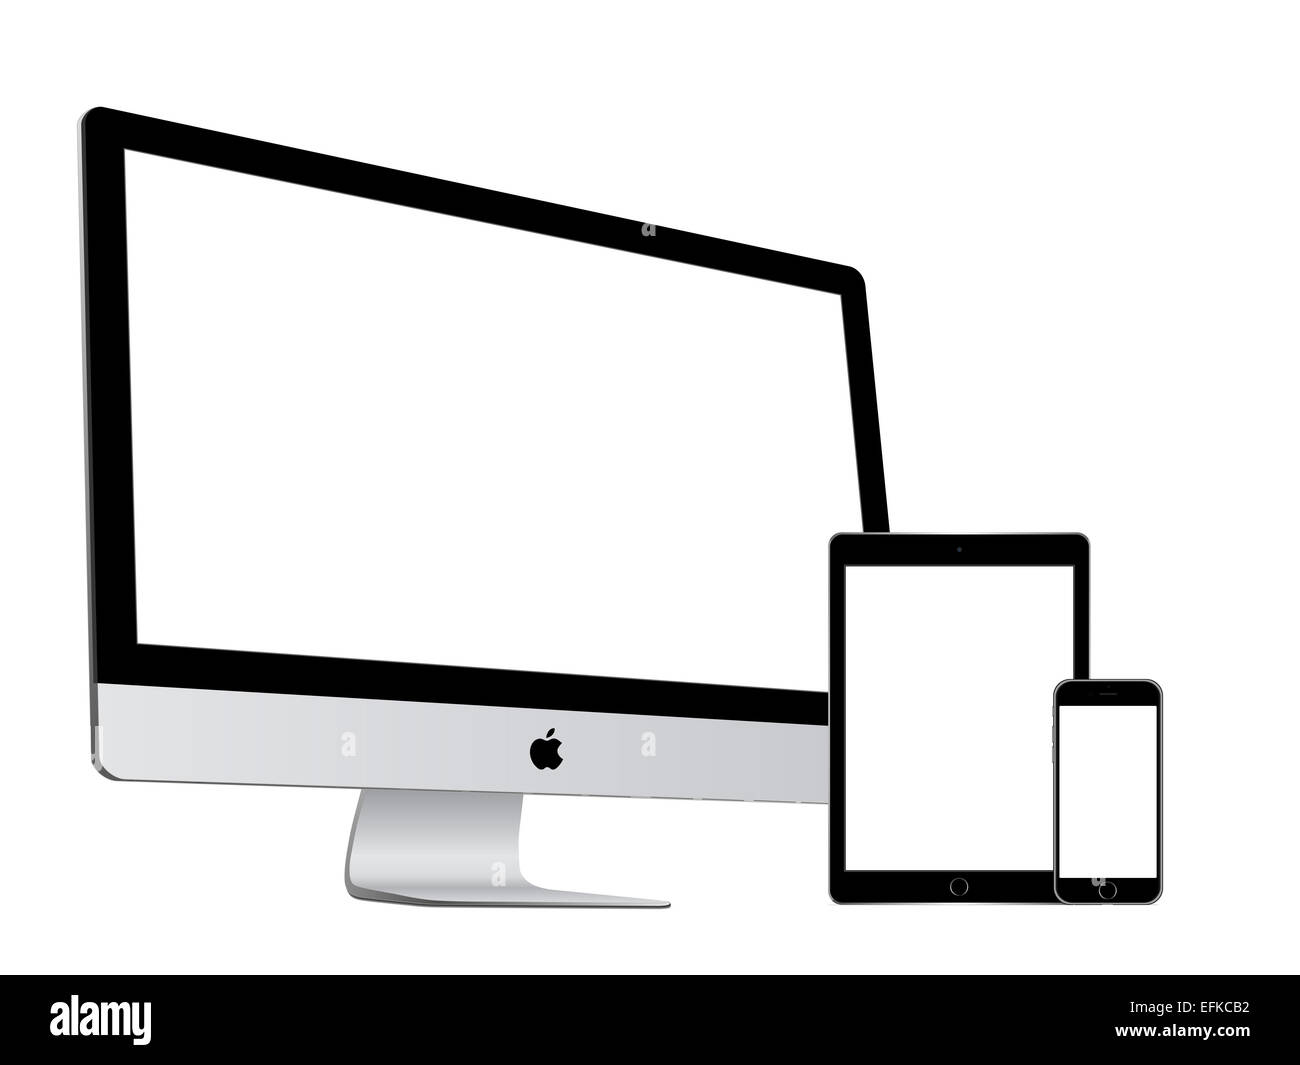 Apple Imac And Ipad Air 2 And Iphone 6 On White Background Stock Photo Alamy